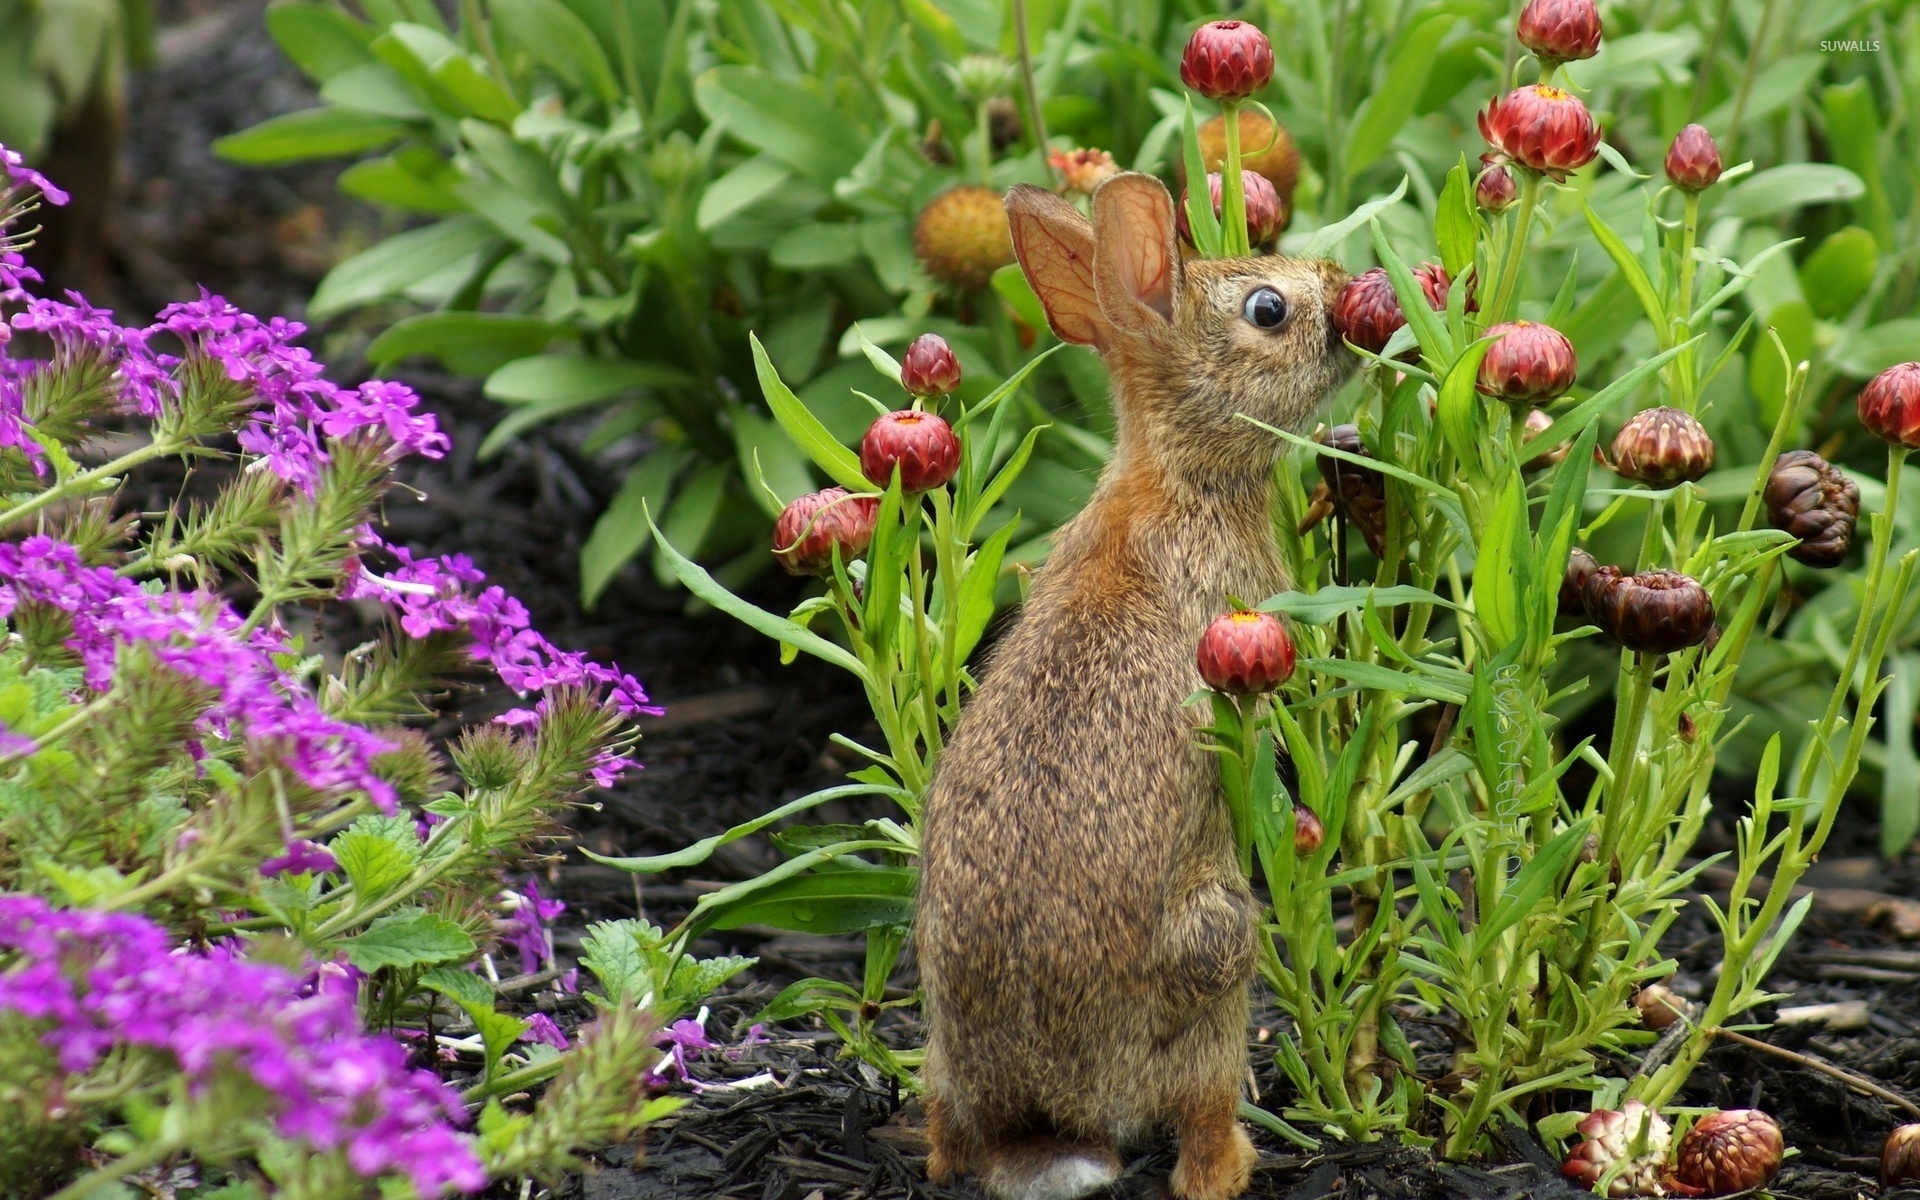 Hare sniffing flower, Animal wallpapers, Nature-inspired images, Beautiful wildlife, 1920x1200 HD Desktop